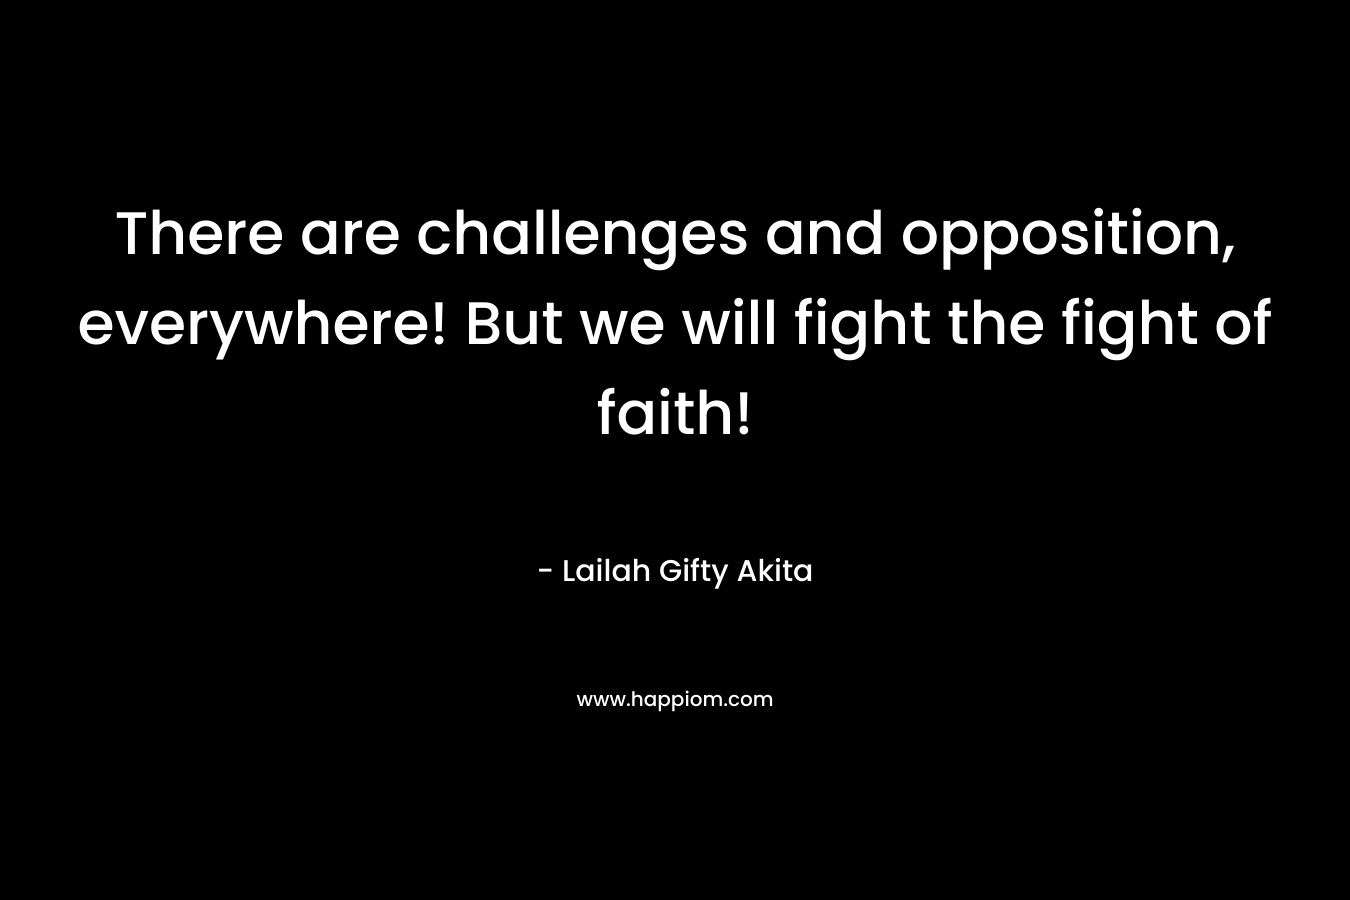 There are challenges and opposition, everywhere! But we will fight the fight of faith!